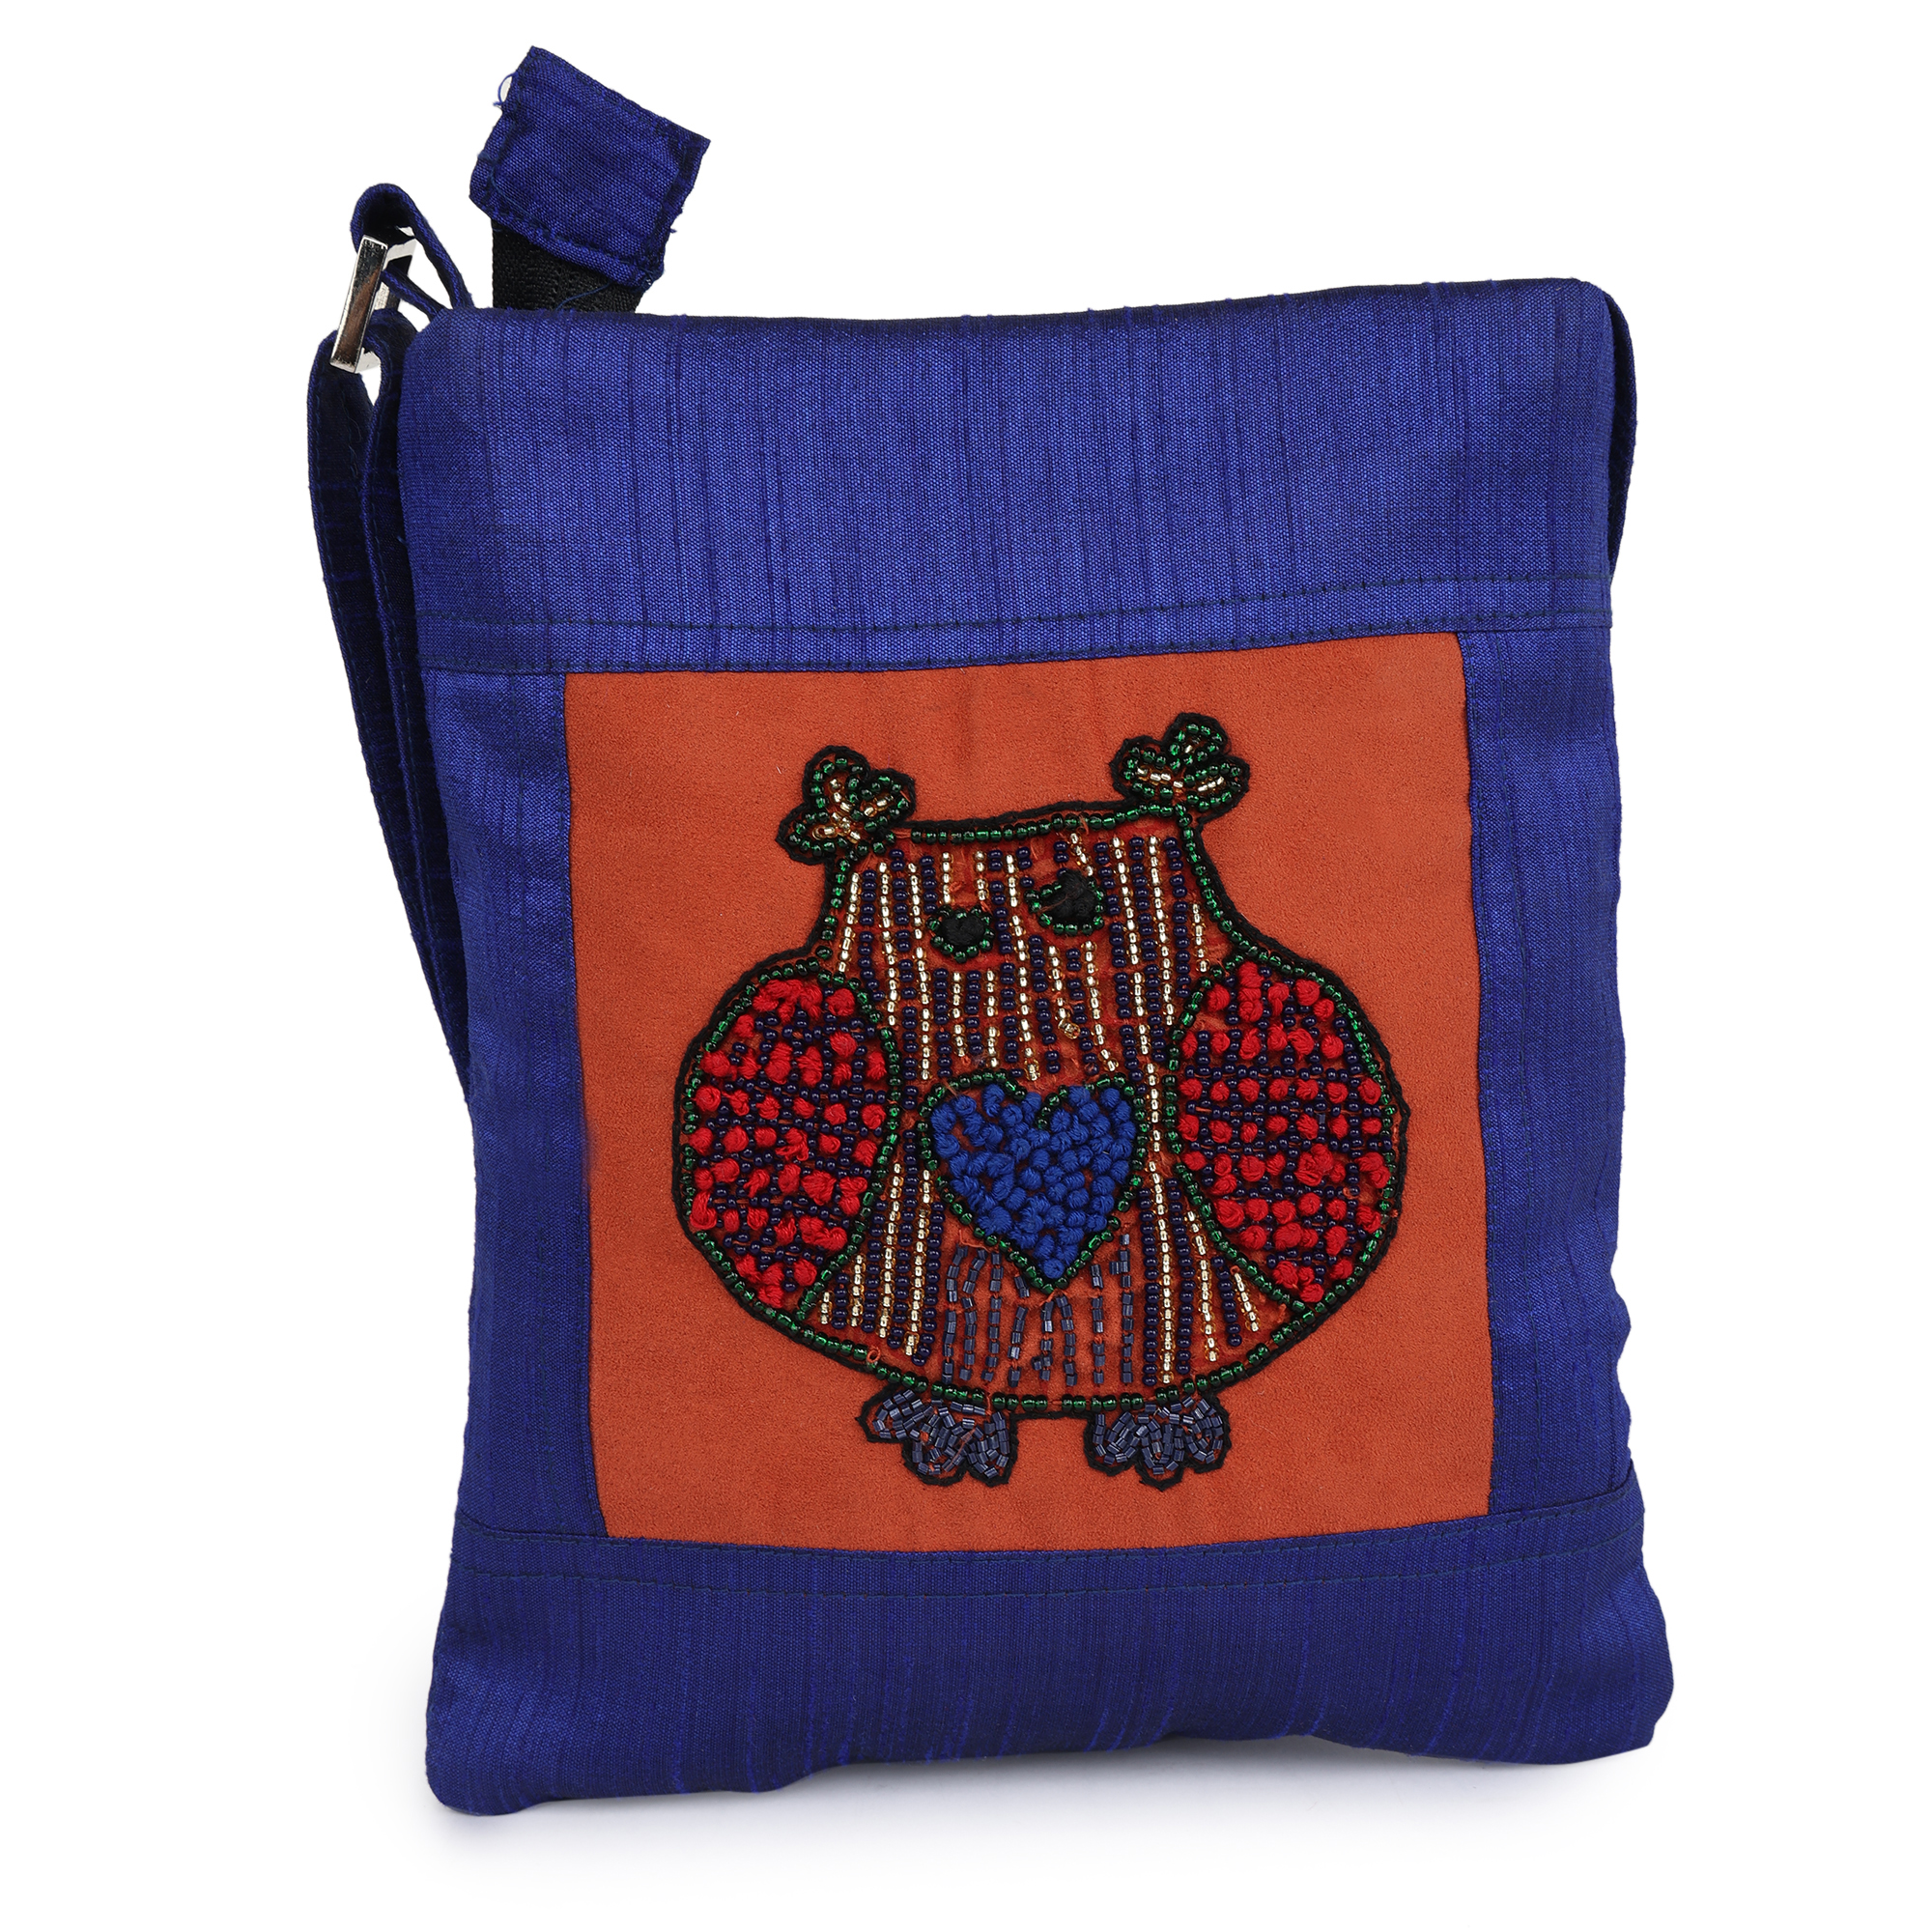 INDHA Owl Embroidery Multicolour Patchwork Ethnic Sling bag Girls/Women -  Curated online shop for handcrafted products made in India by women artisans